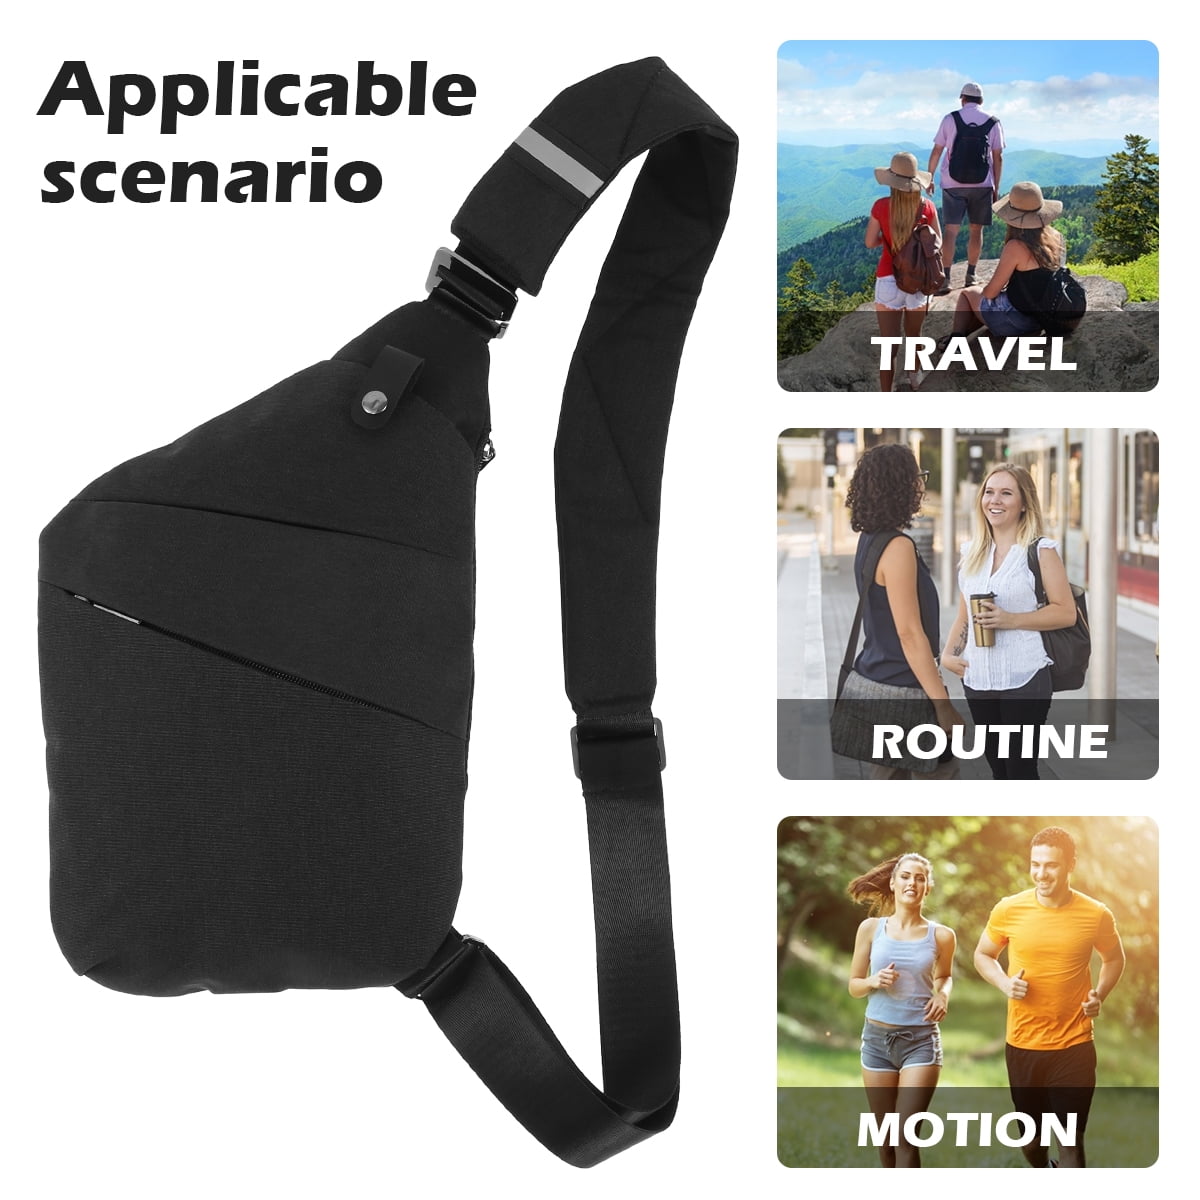 Men Crossbody Sling Bag Waterproof Shoulder Chest Back Pack Anti Theft Sash  Bags Pouch New Sports Bag